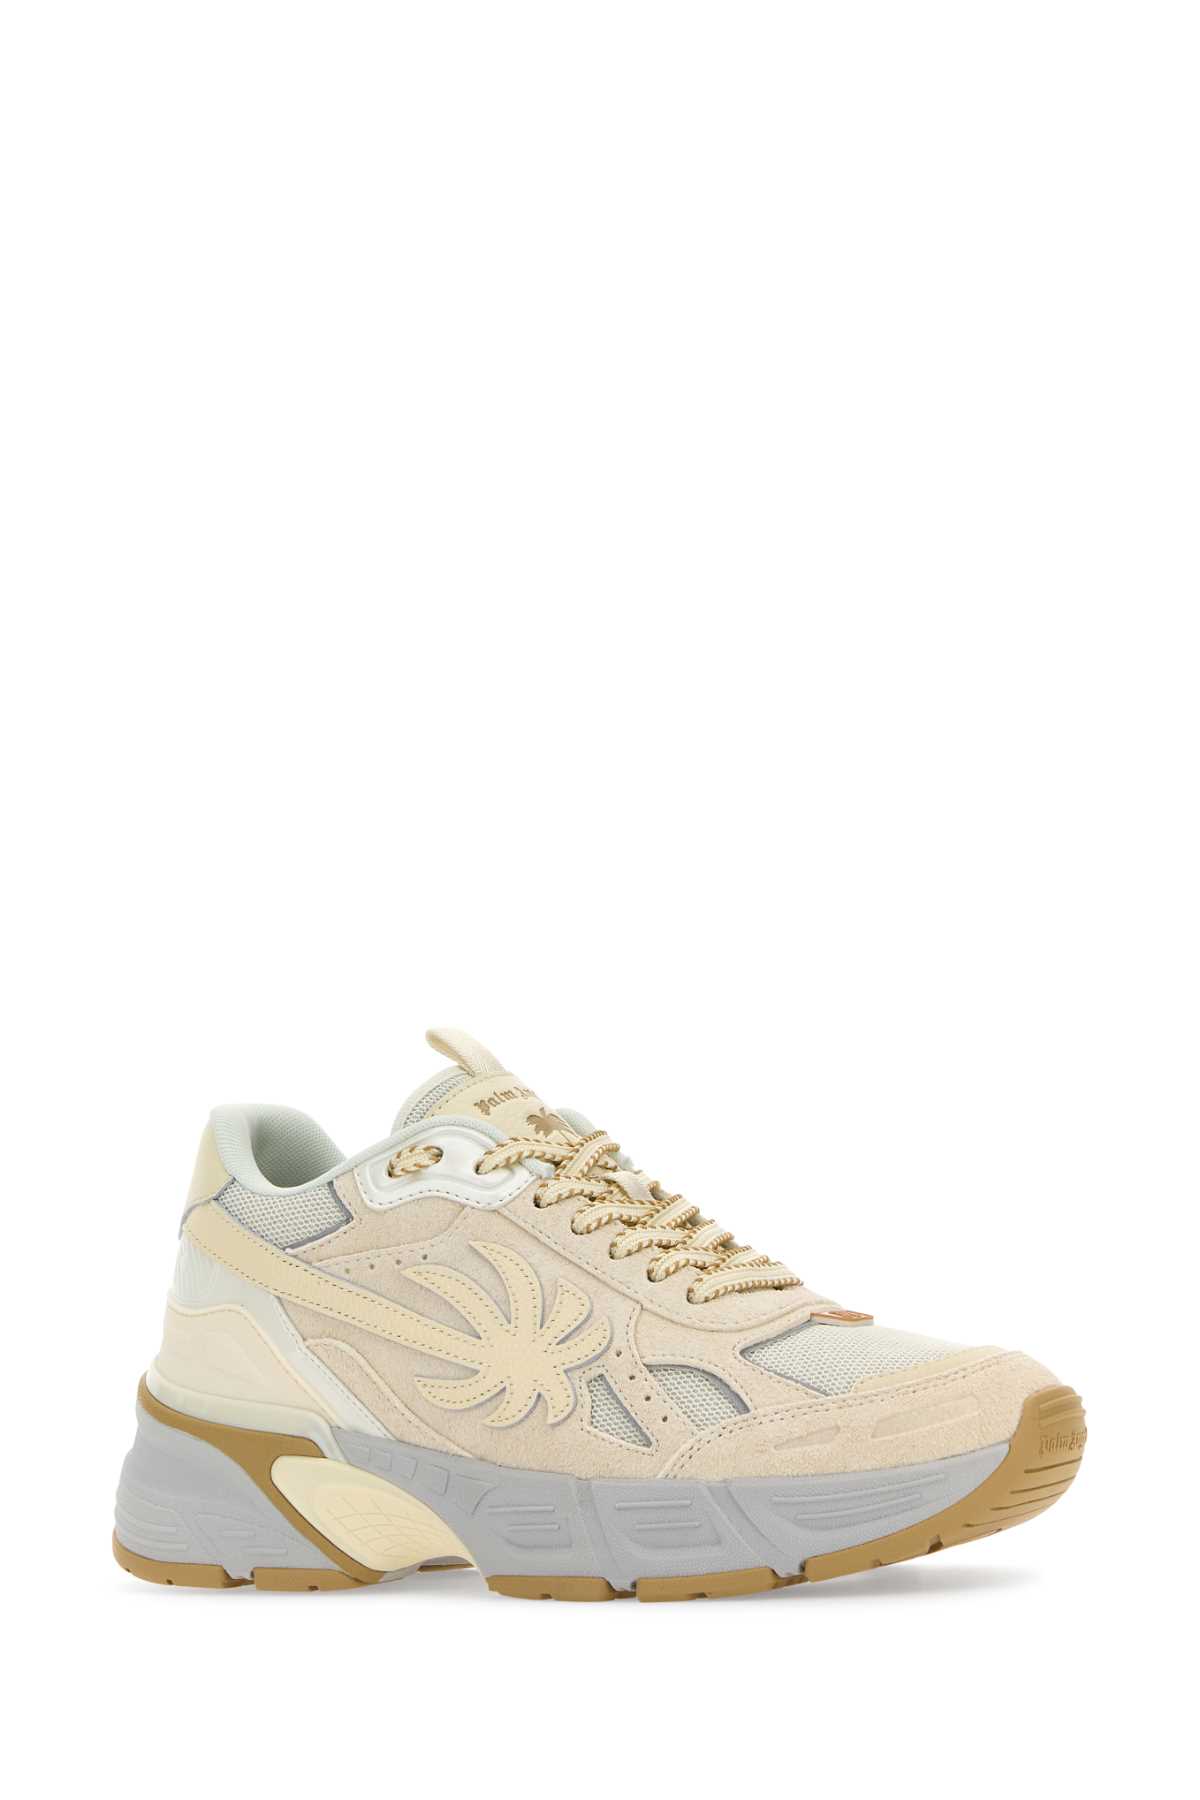 PALM ANGELS MULTICOLOR LEATHER AND FABRIC PA 4 SNEAKERS